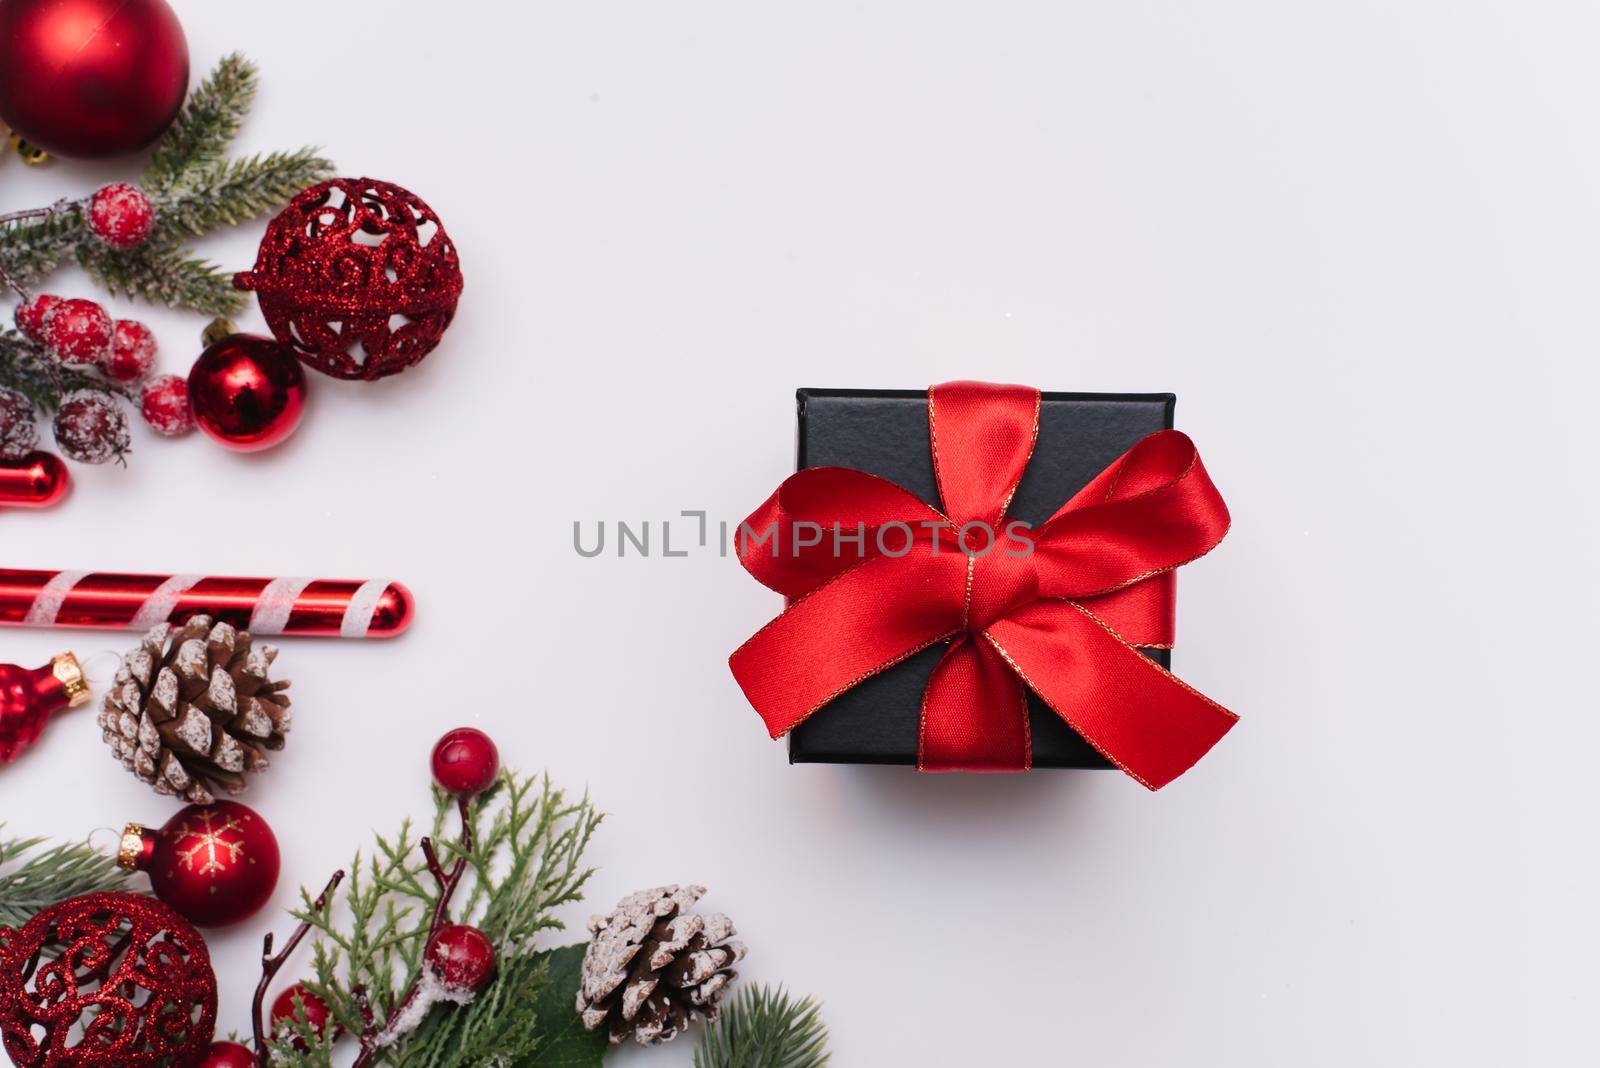 Christmas gift with a red bow on a white background with fir branches and decorations on a white background. View from above.